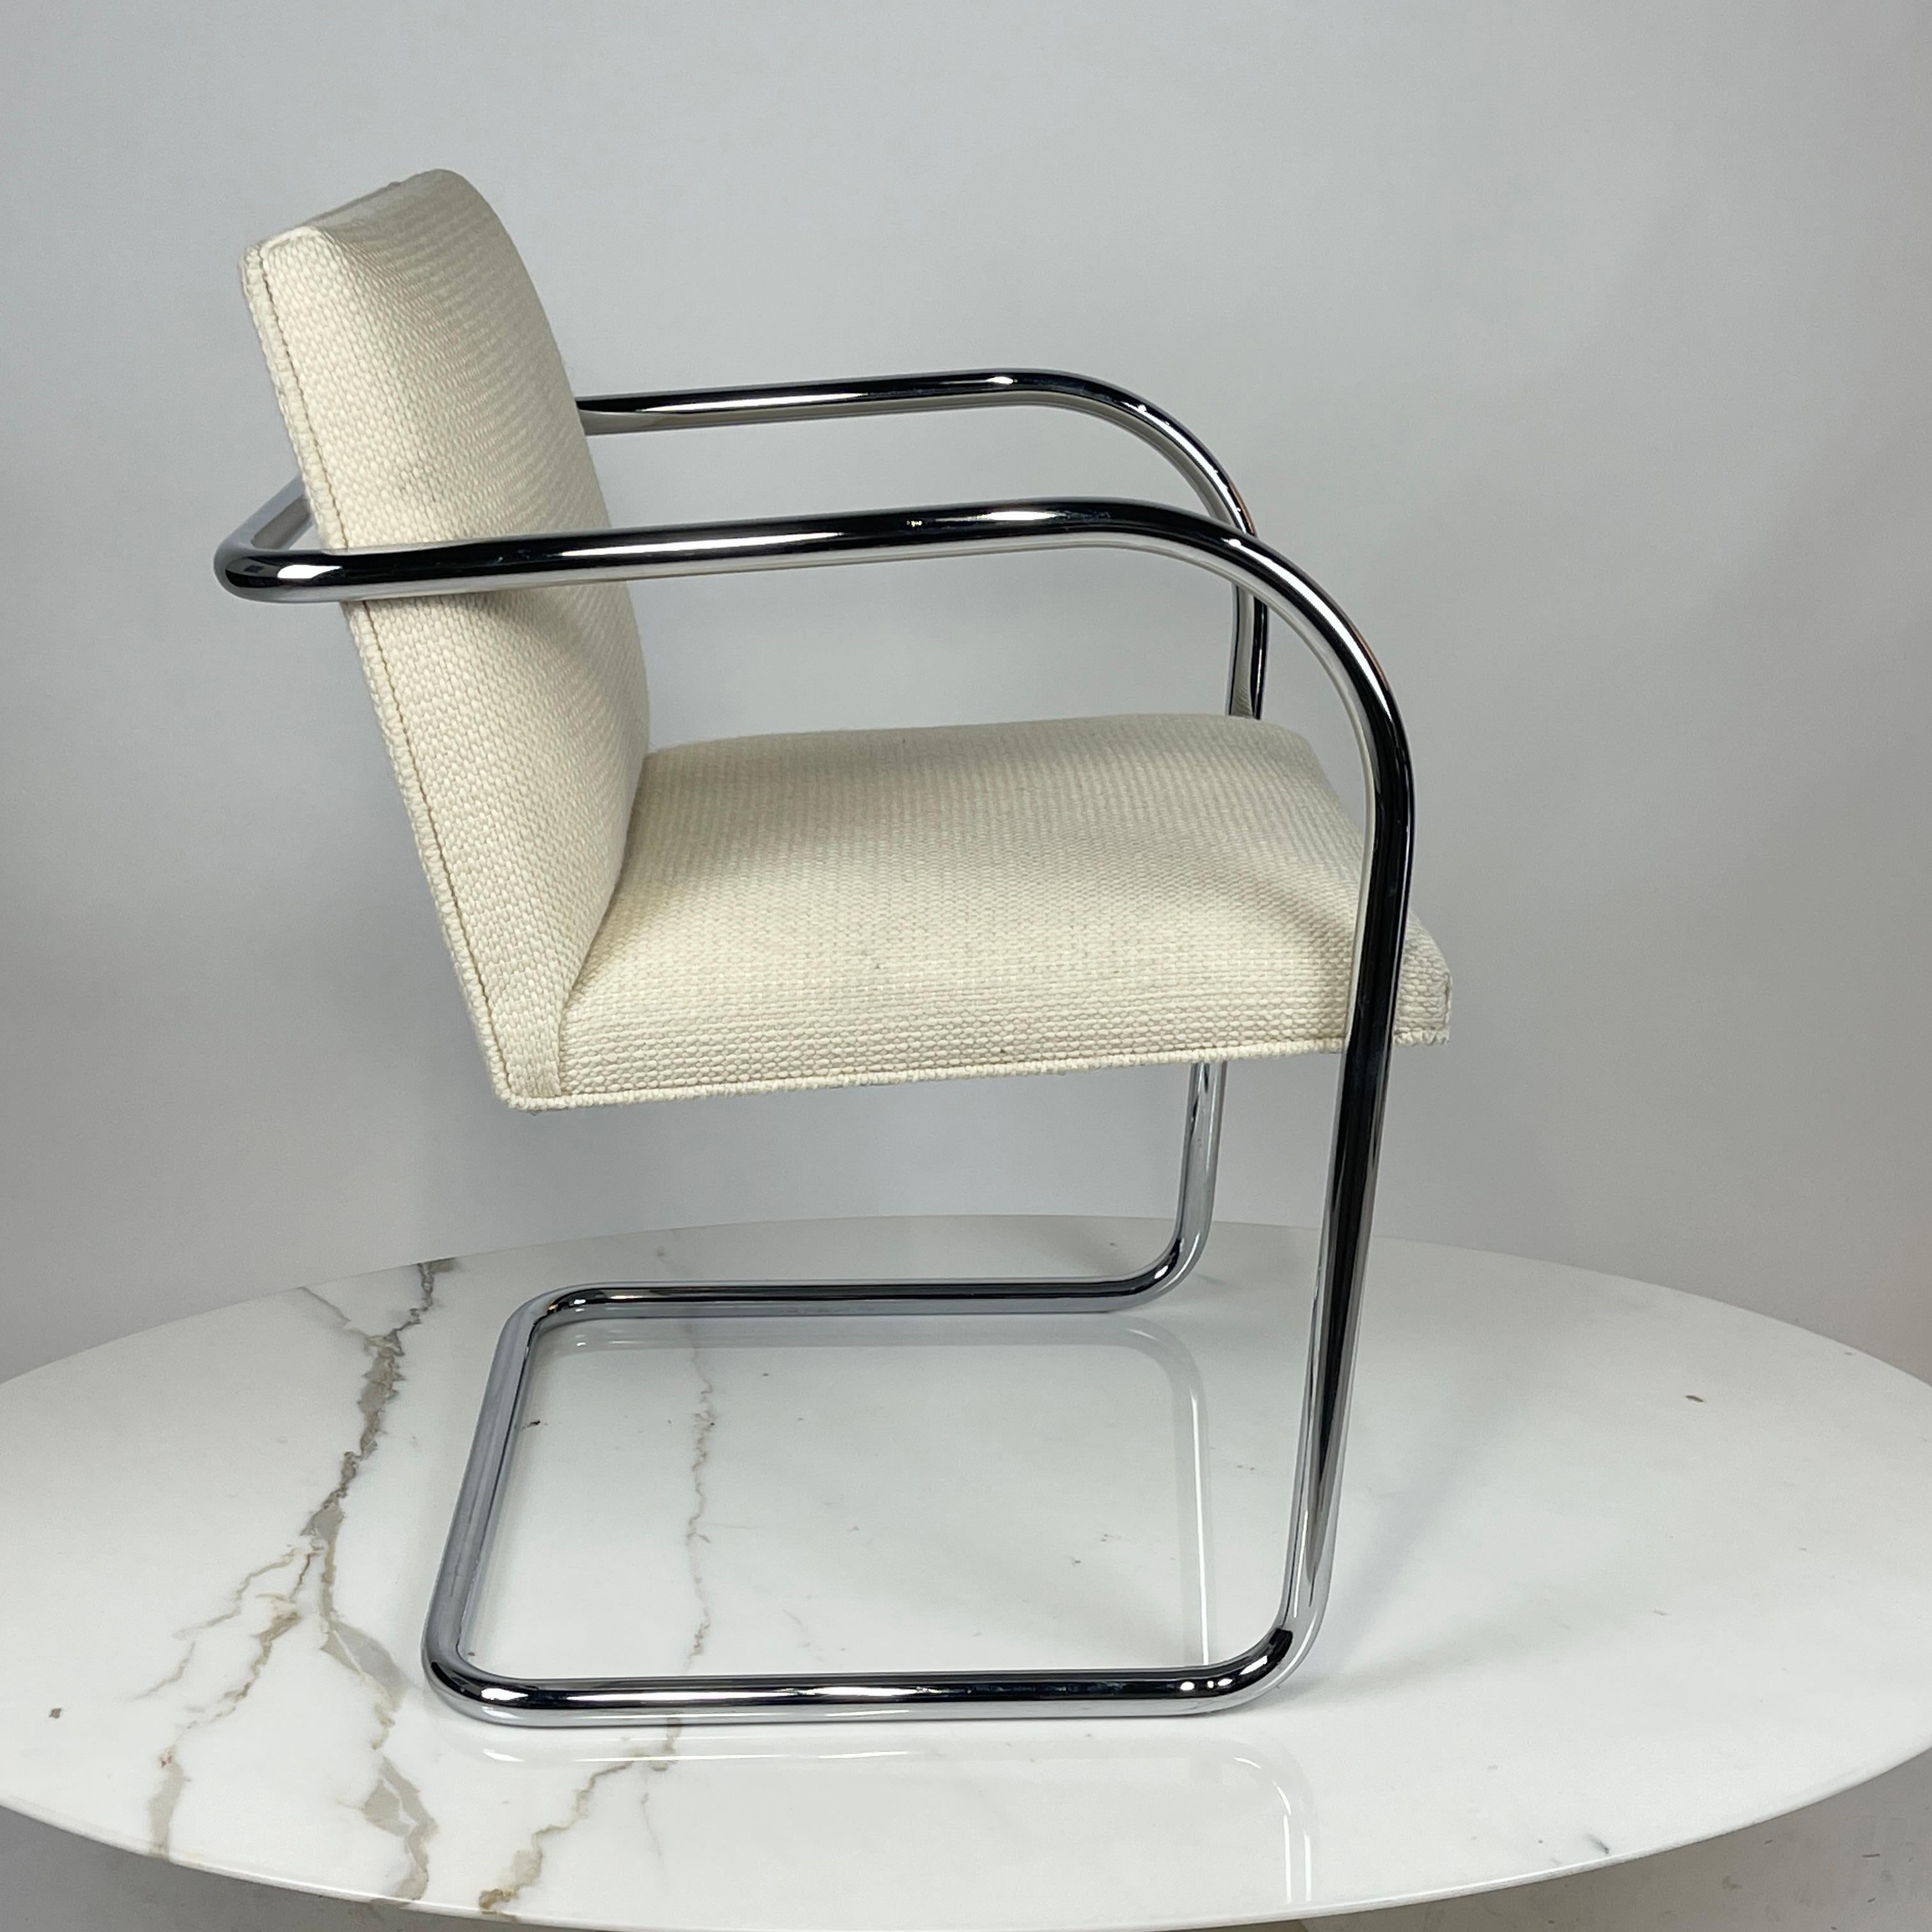 Knoll Brno chair designed by Mies Van der Rohe. These chairs are upholstered in Knoll's Cato upholstery. Color is 'natural'- which reads as a pale oatmeal color. These chairs are from 2018 so in very nice condition. 
Priced per chair. Approximately